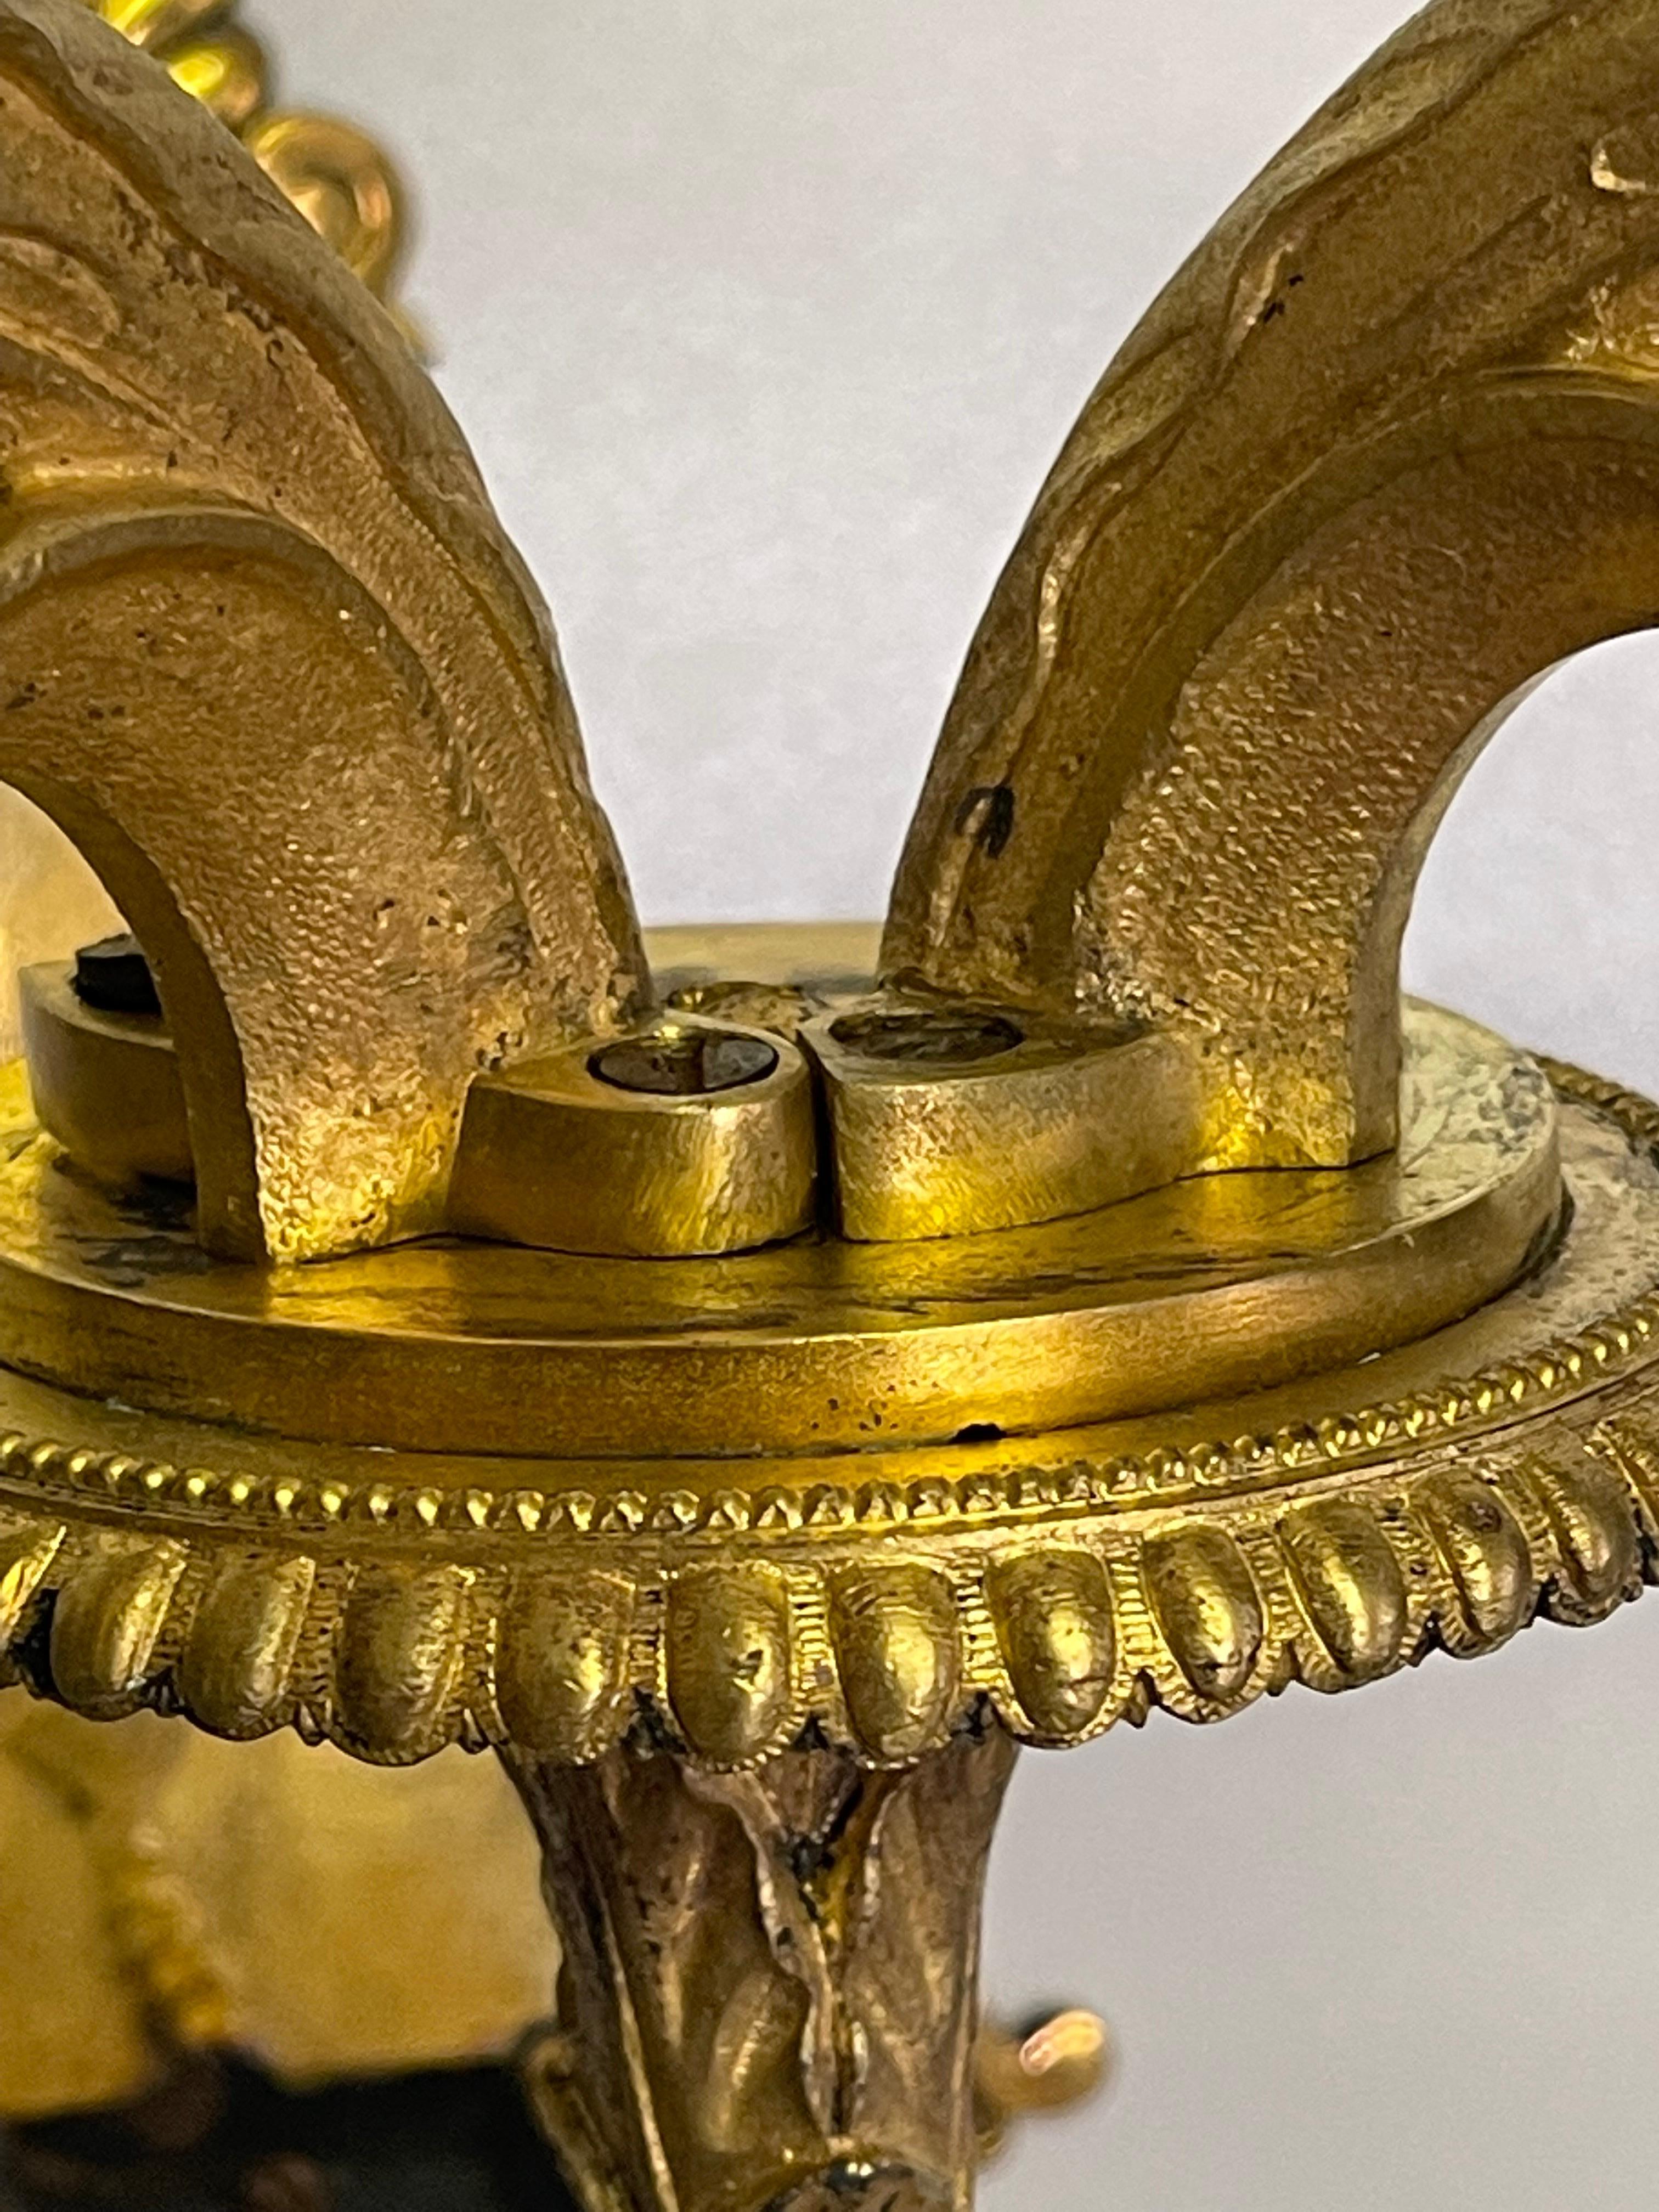 Pair of Stunning Russian Empire Period Ormolu Wall Sconces , ca. 1820s For Sale 3